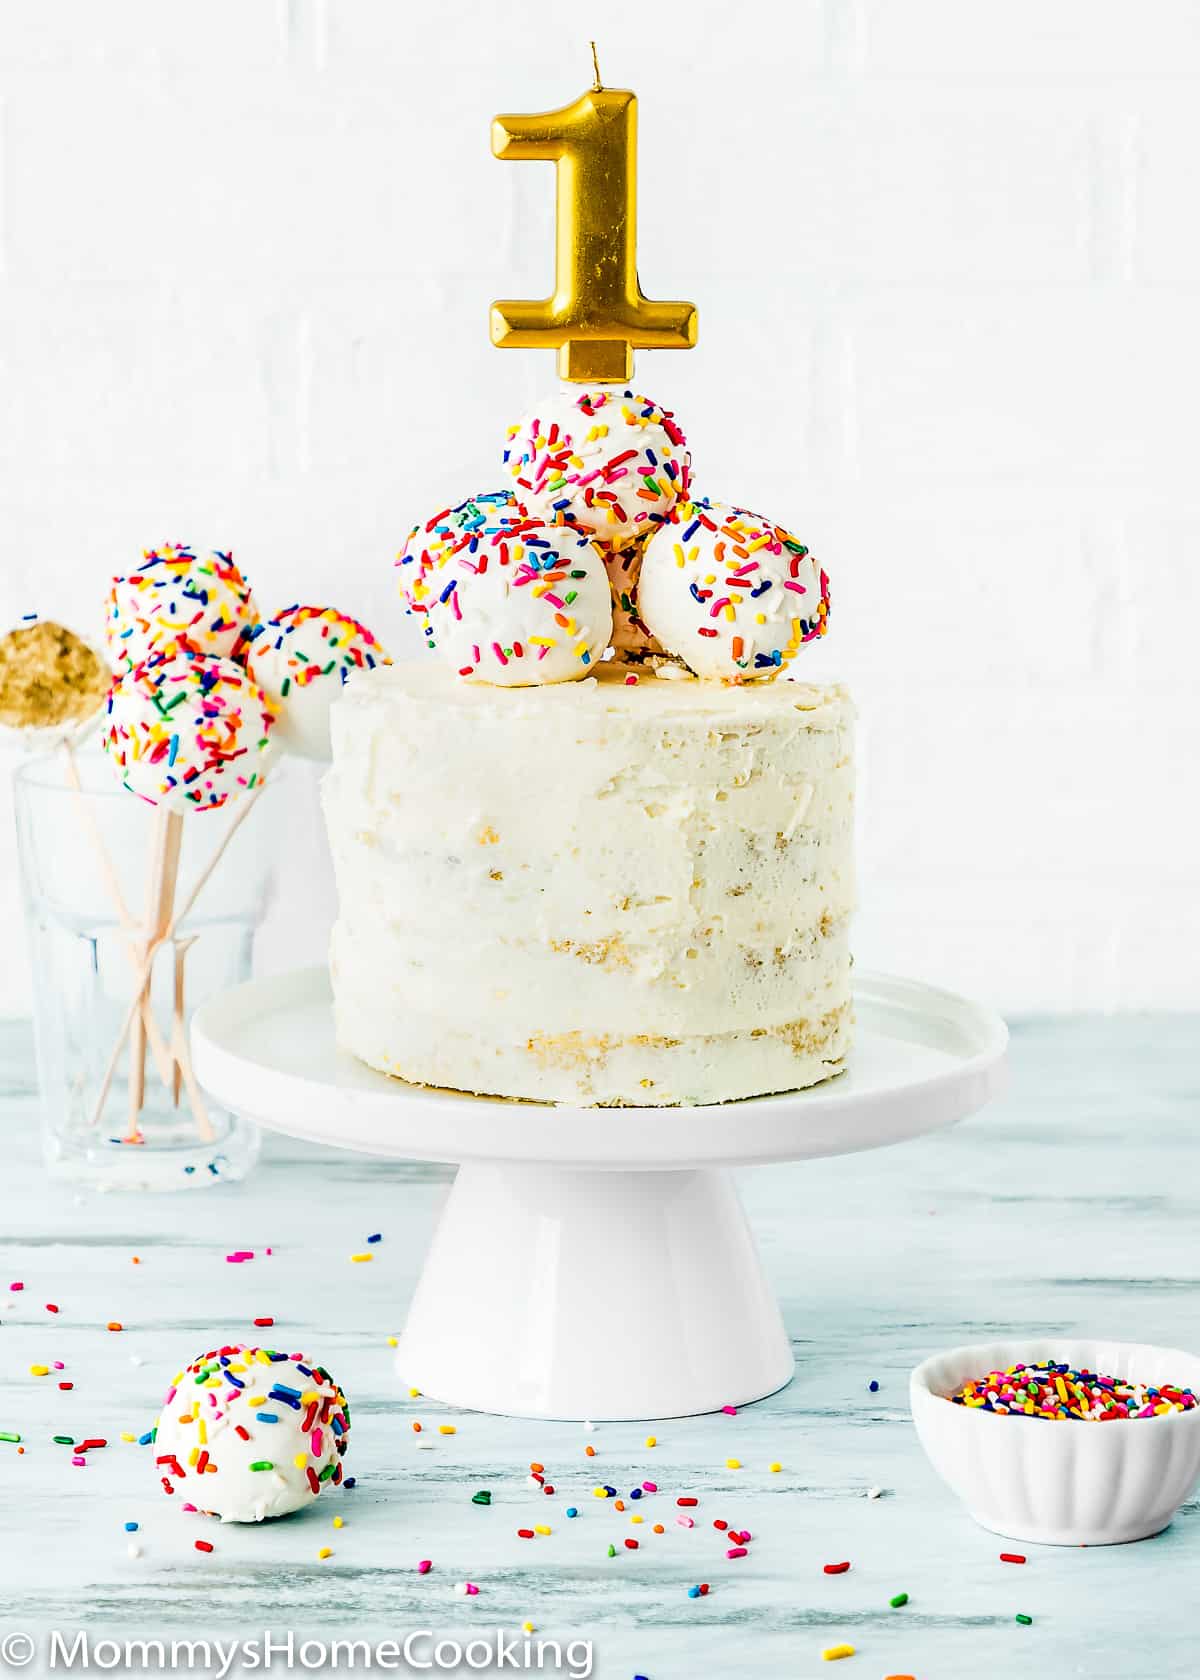 egg-free refined sugar-free smash cake with cake pops on top and a candle.